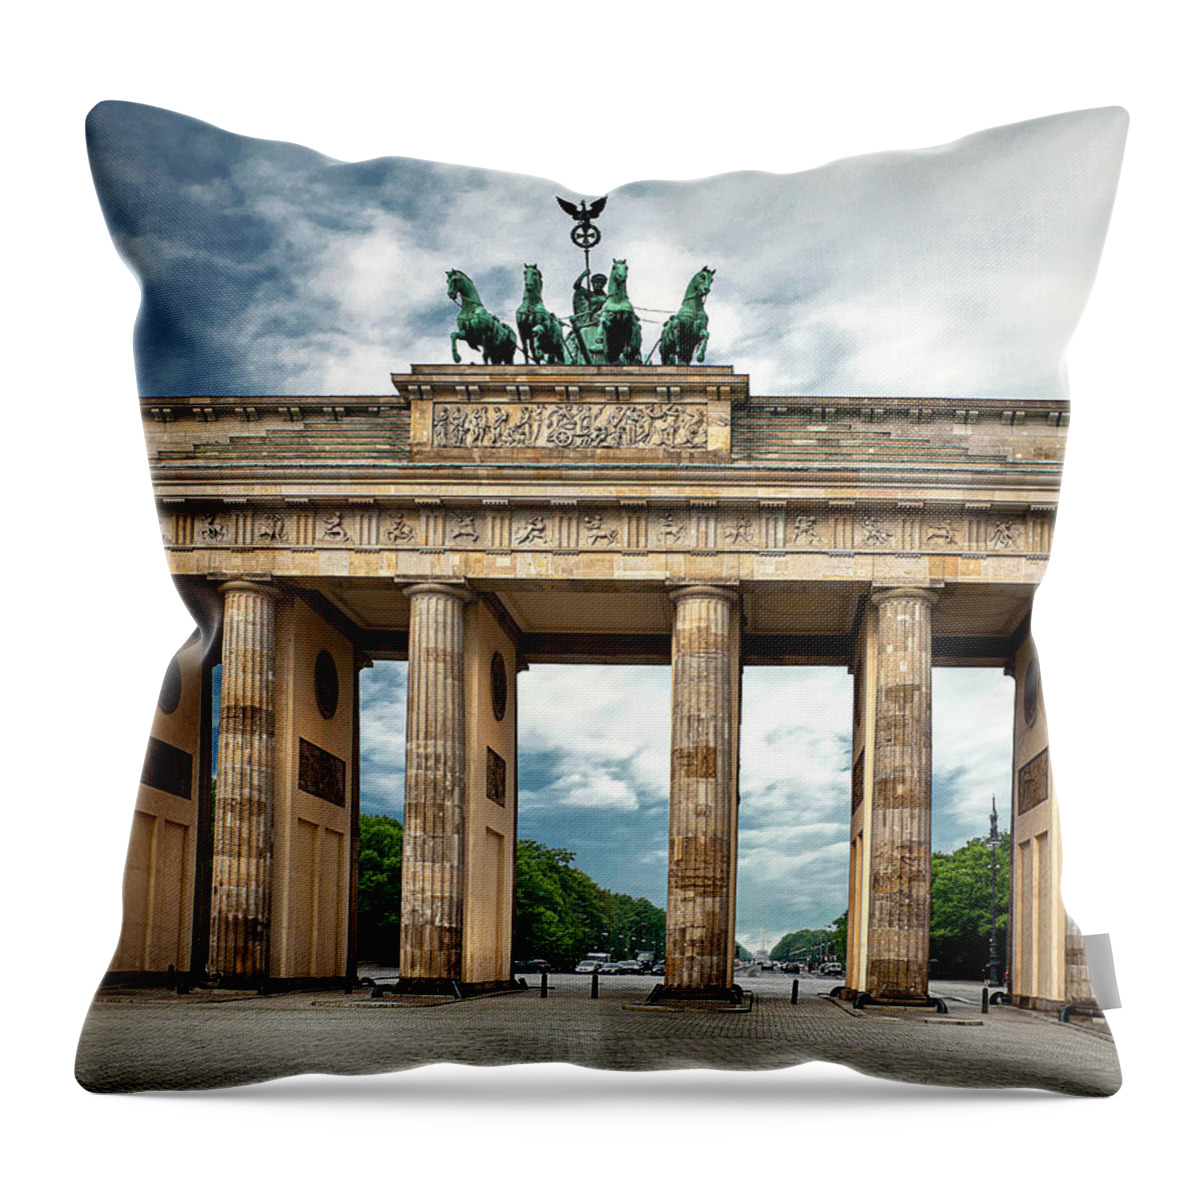 Endre Throw Pillow featuring the photograph The Brandenburg Gate by Endre Balogh